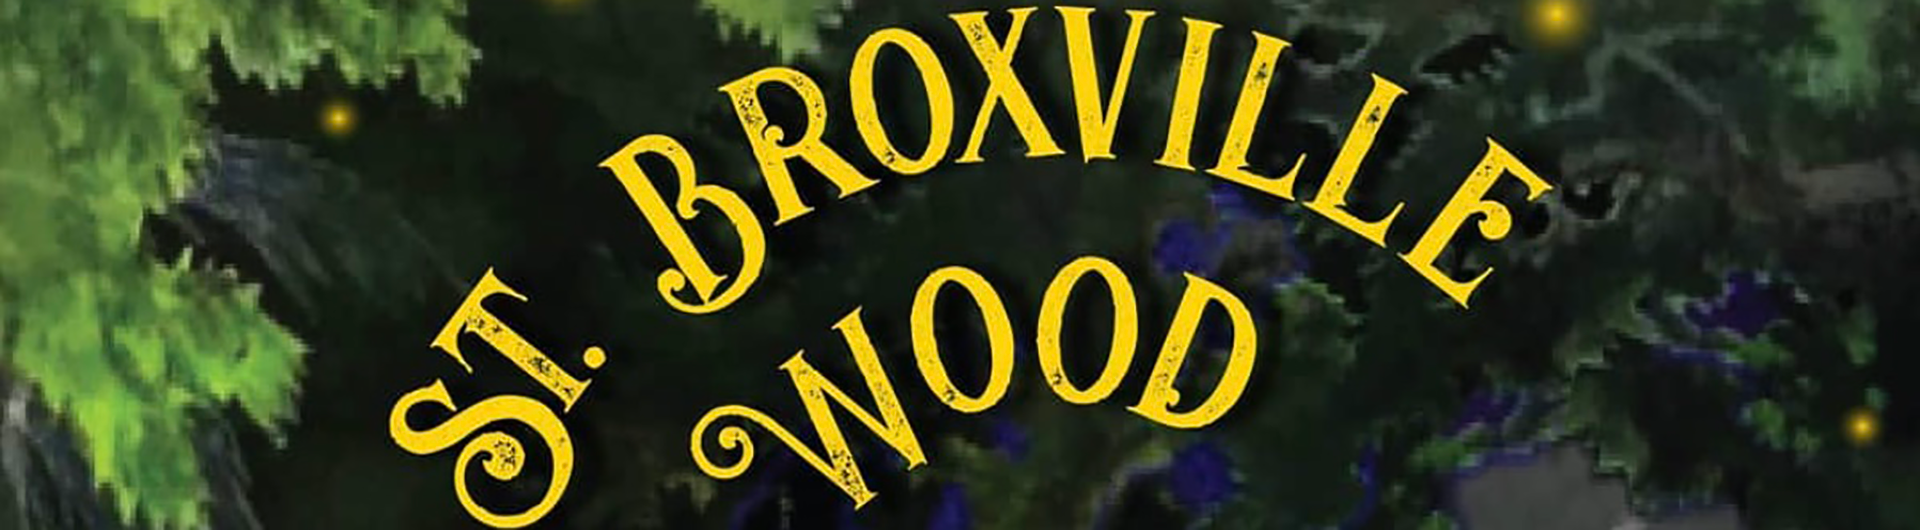 Banner for Virtual Show: St. Broxville Wood